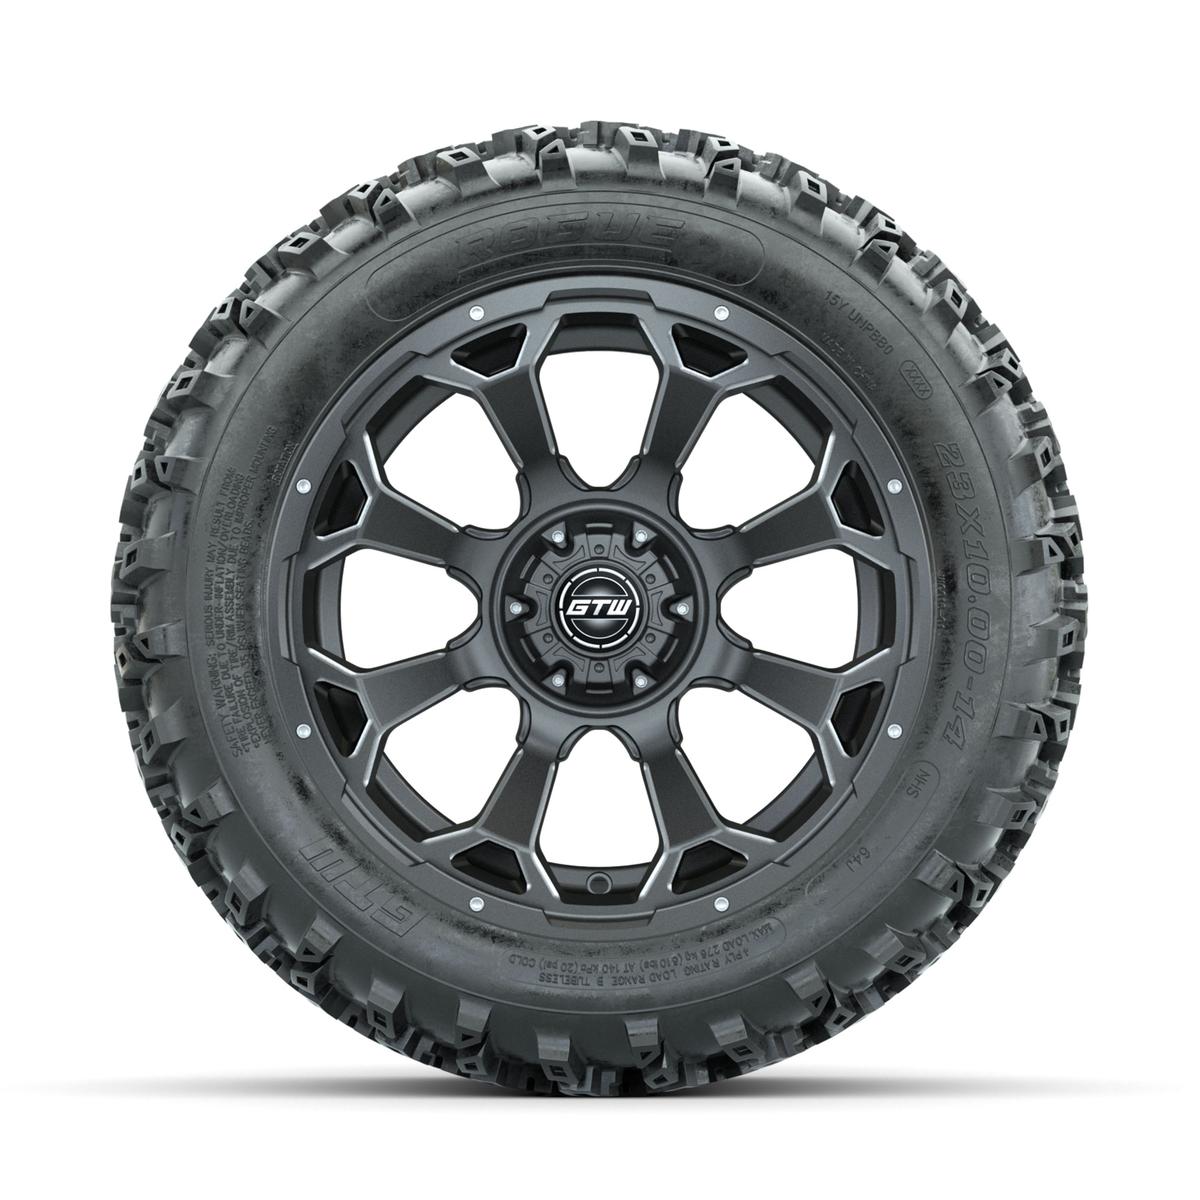 GTW Raven Ball Milled/Matte Grey 14 in Wheels with 23x10.00-14 Rogue All Terrain Tires – Full Set